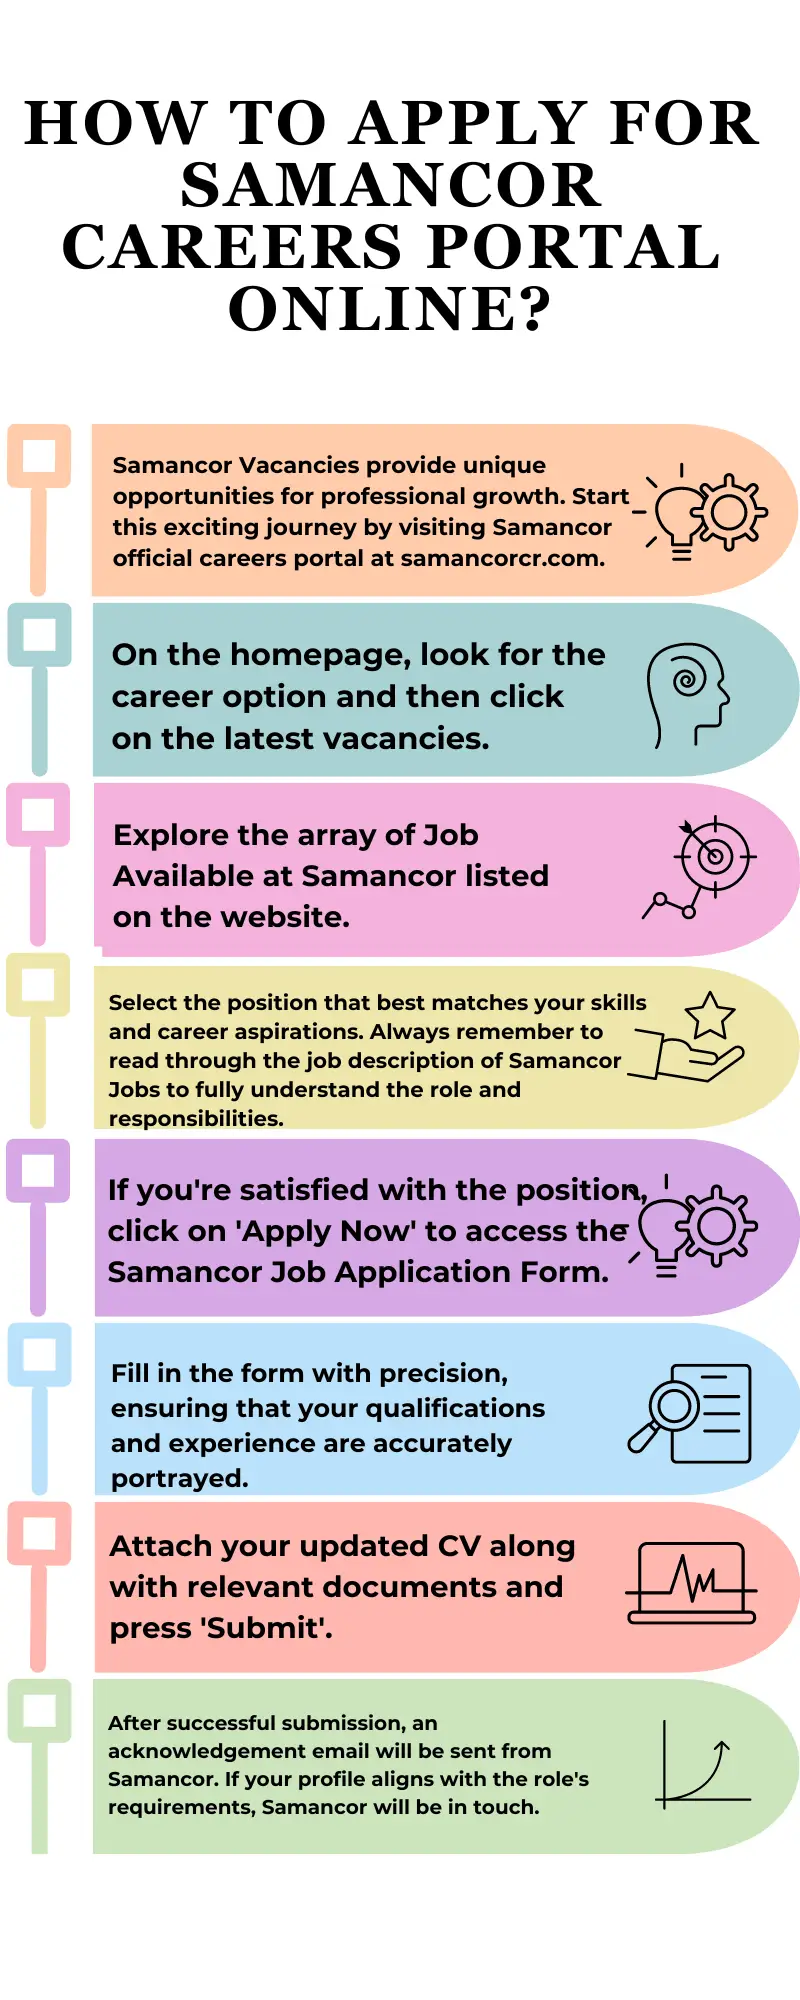 How To Apply for Samancor Careers Portal Online?